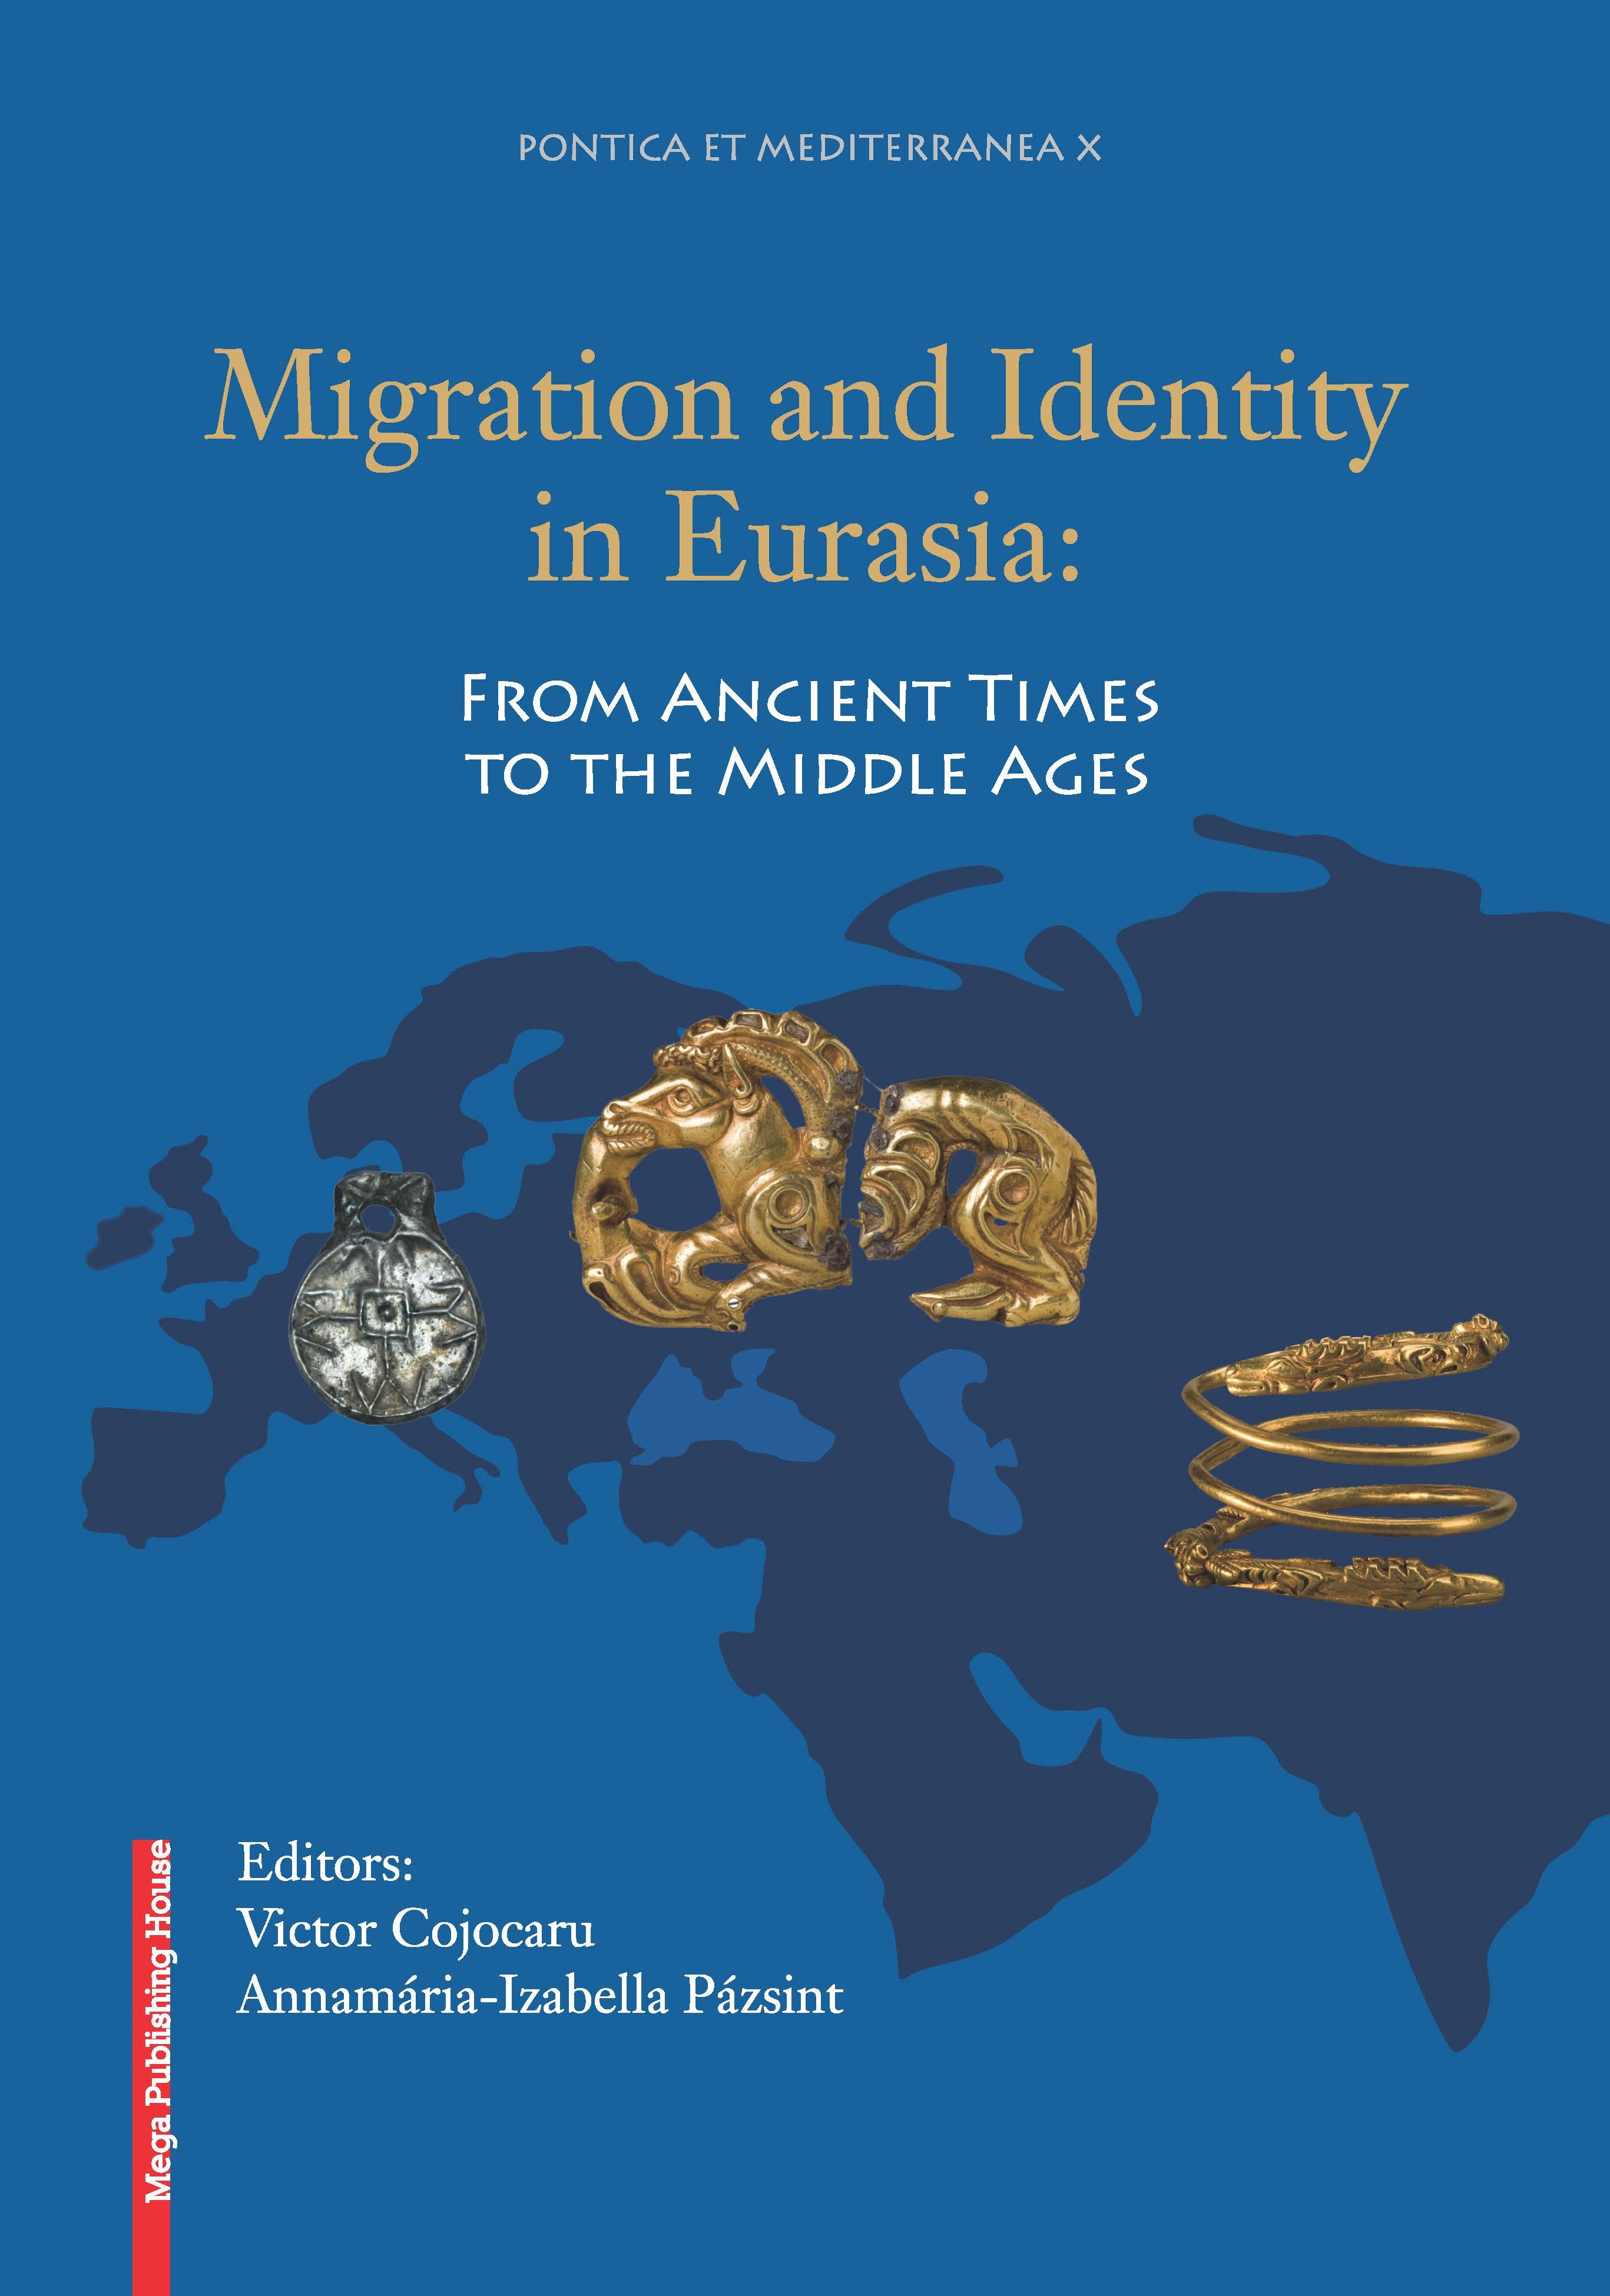 Cojocaru, Victor – Annamária-Izabella Pázsint : Migration and Identity in Eurasia: From Ancient Times to the Middle Ages